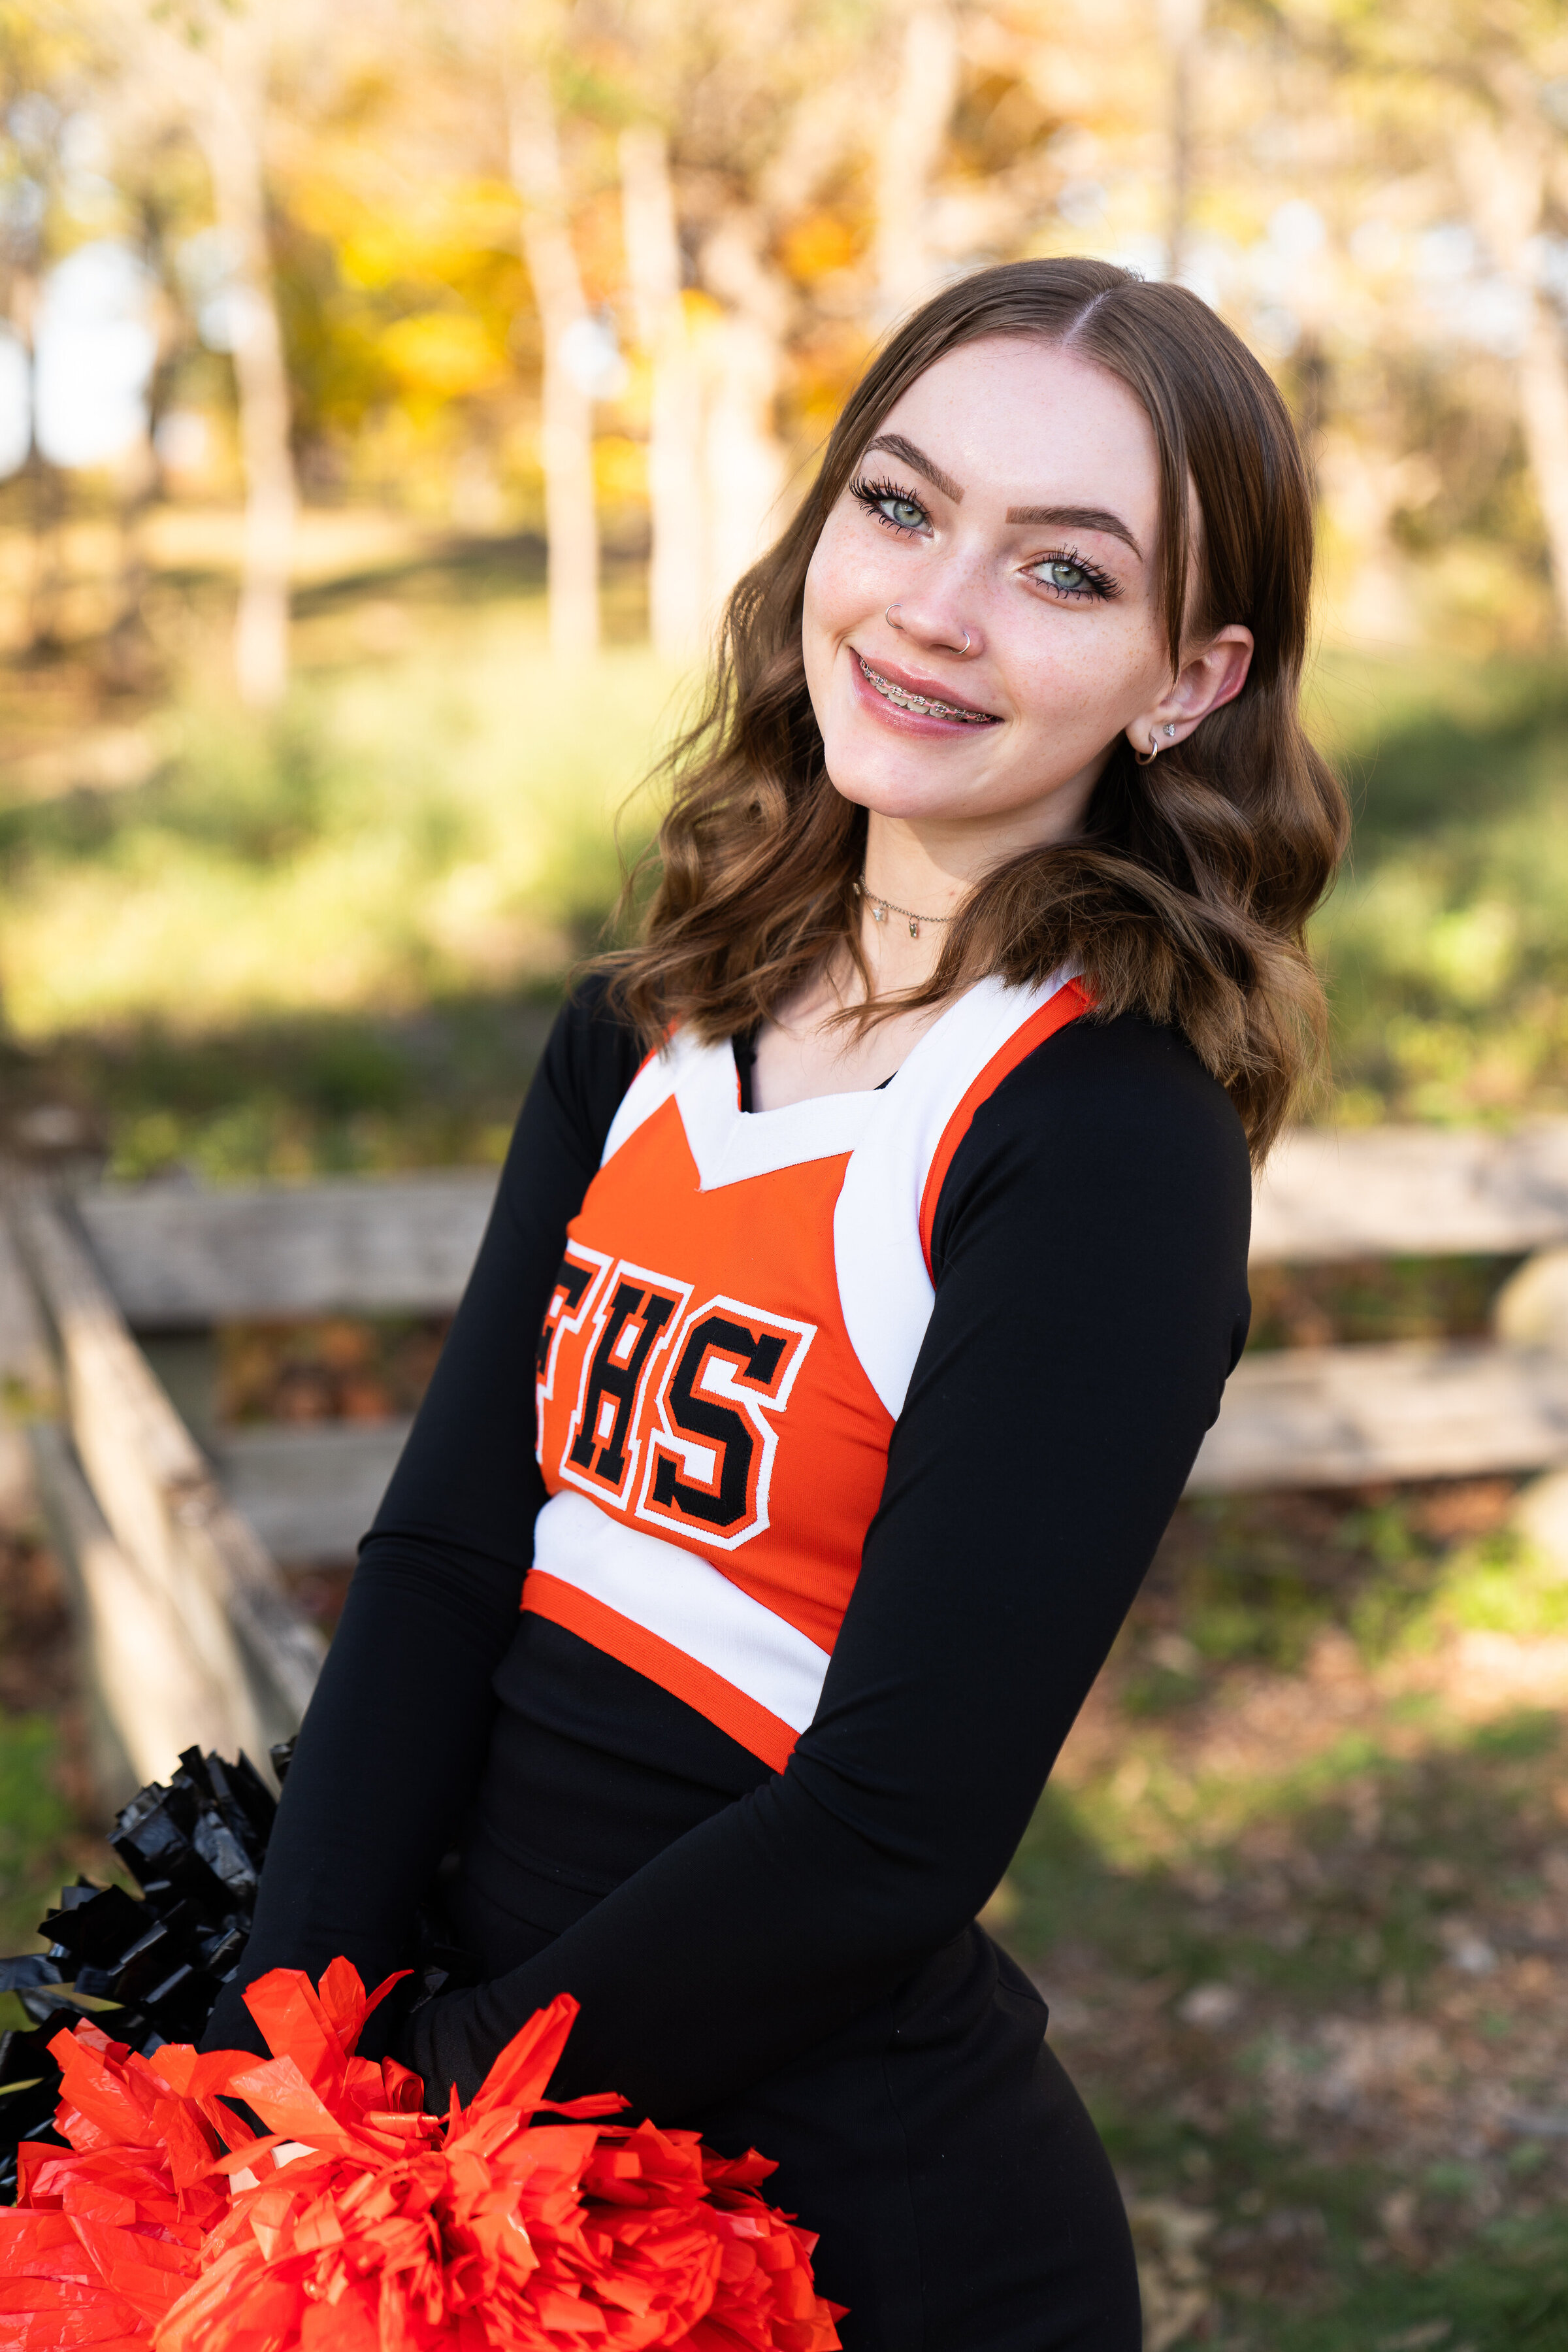 High school girl wearing her cheerleader outfit poses for her senior photos.